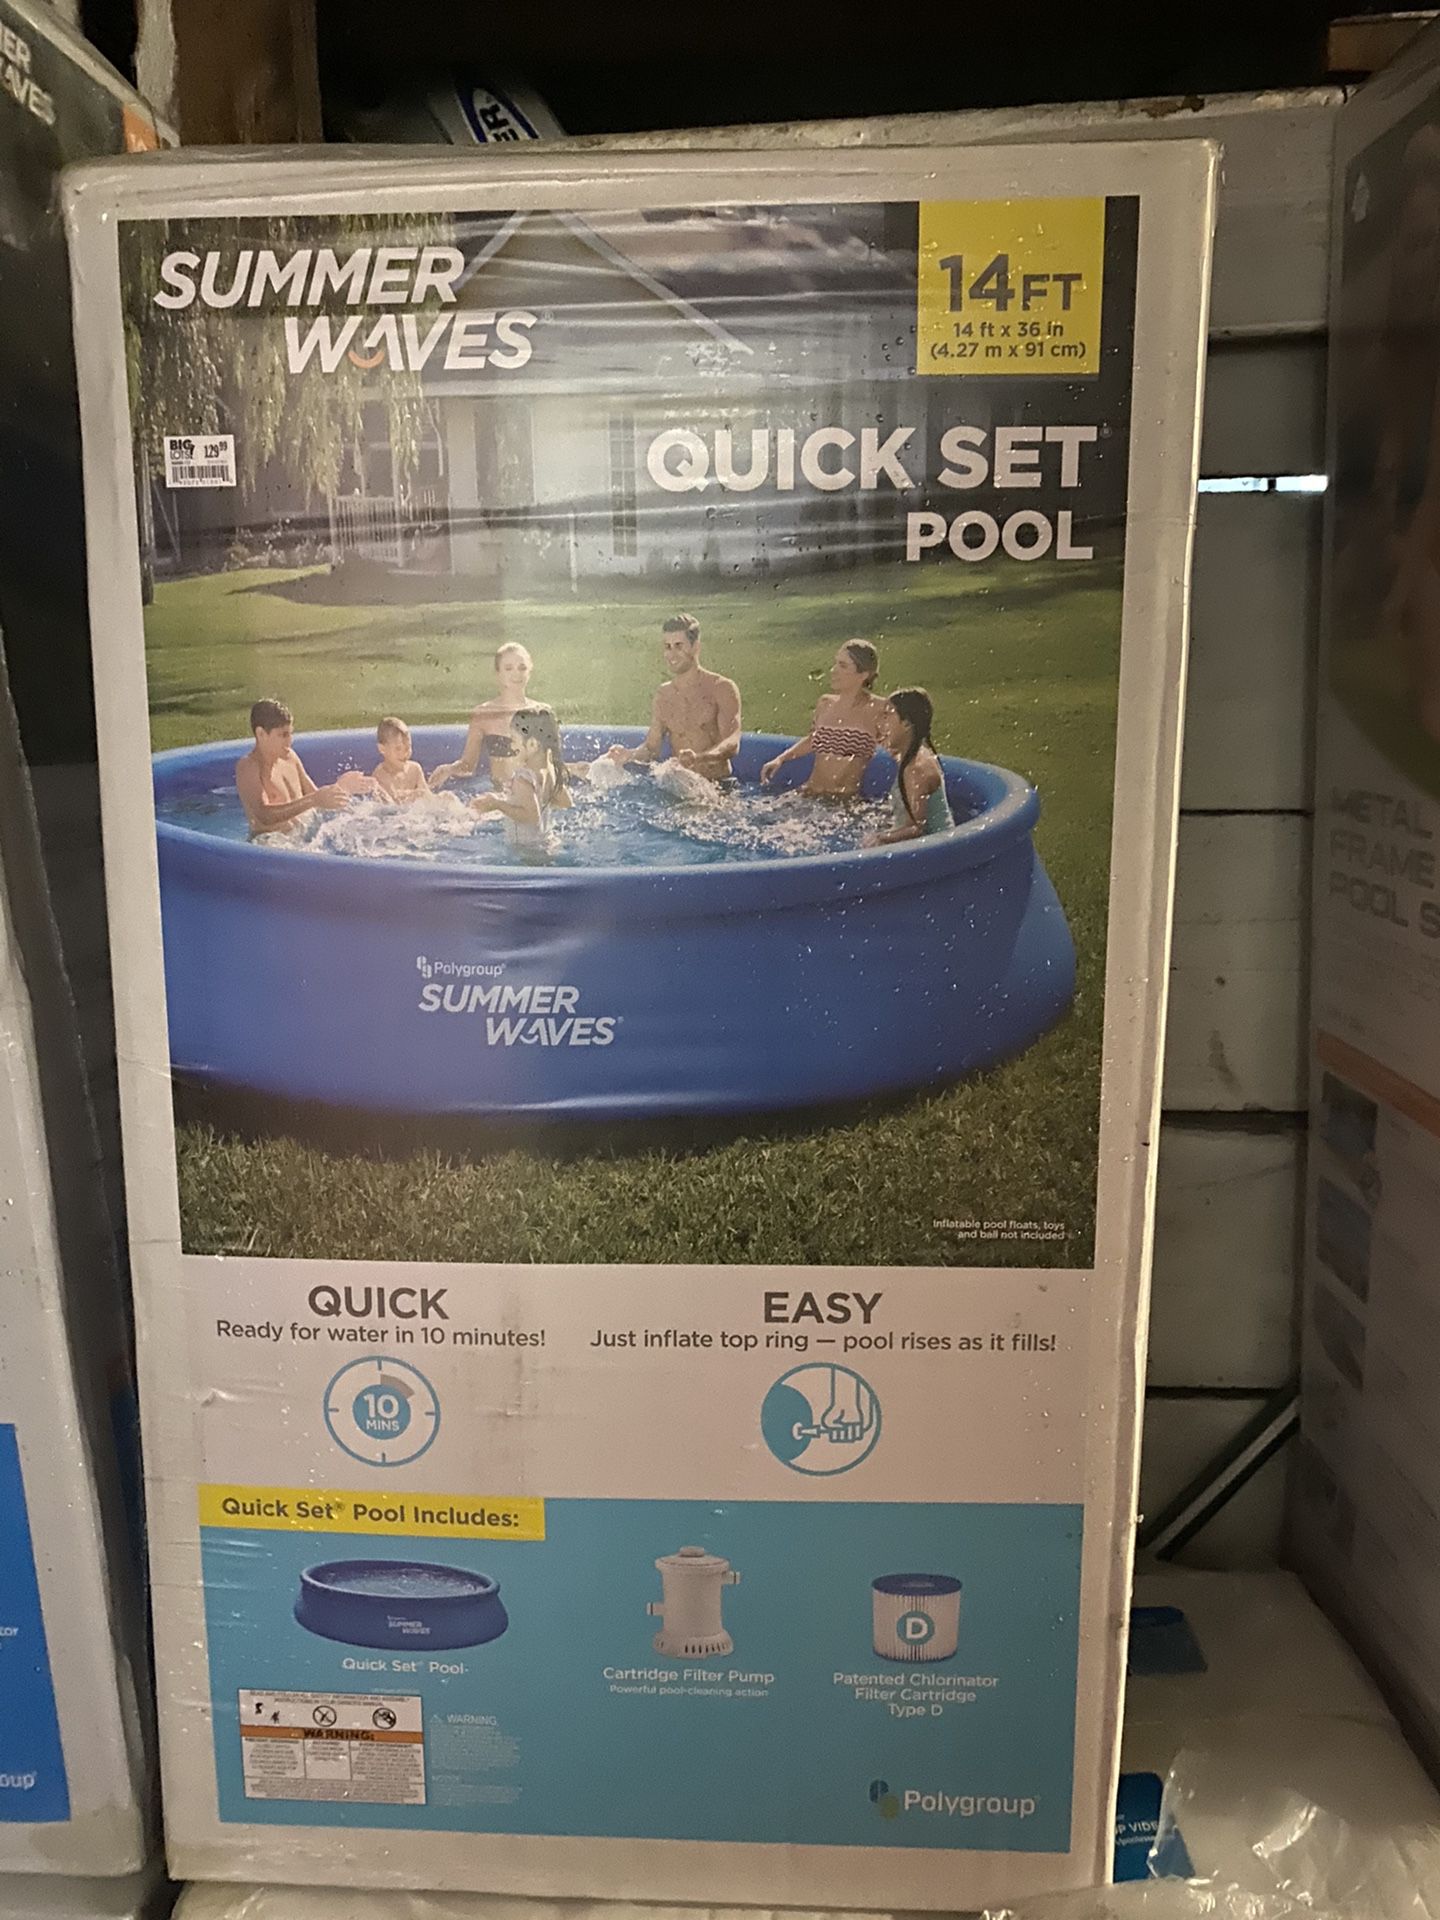 Summer Waves 10ft X 30in easy set up Pool w/ Filter Pump New Sealed